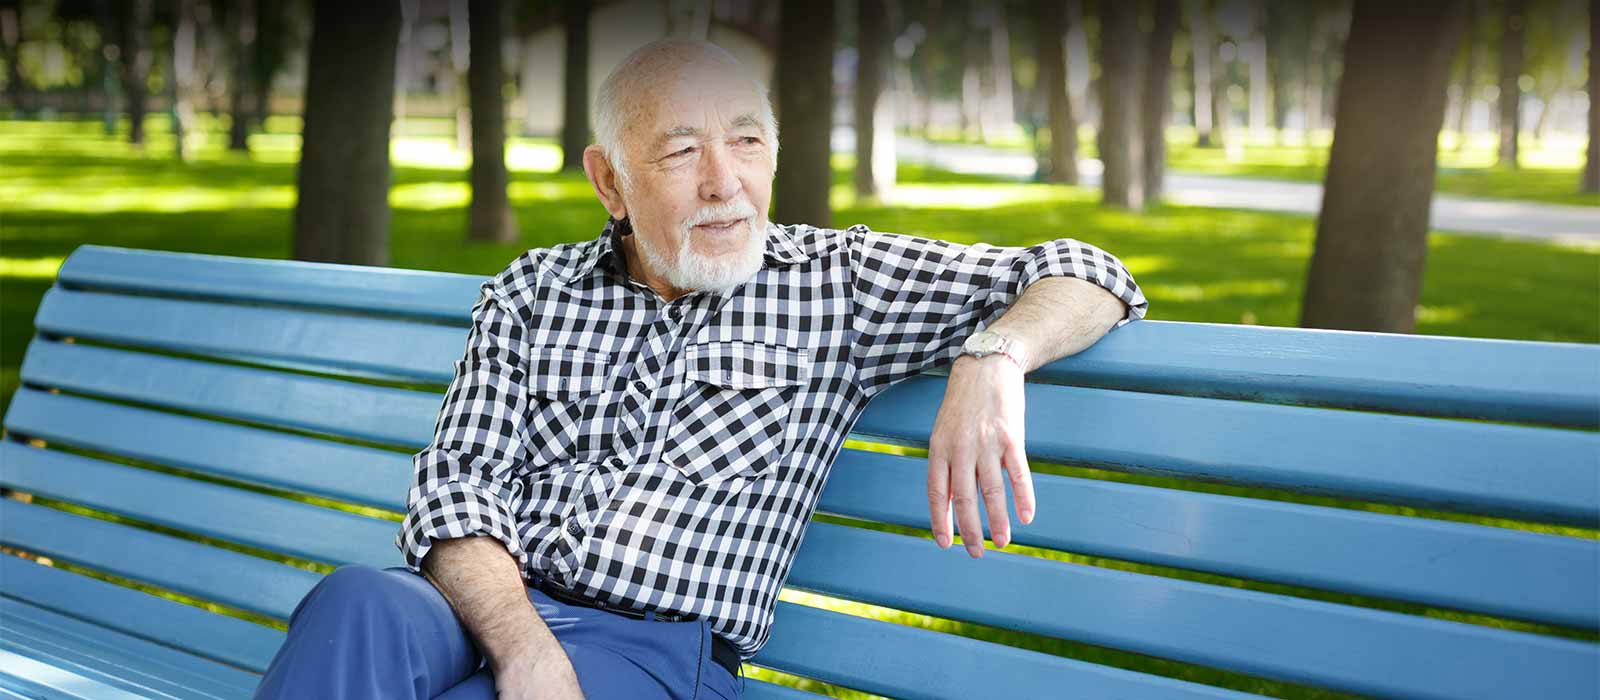 Mature man relaxing on park bench